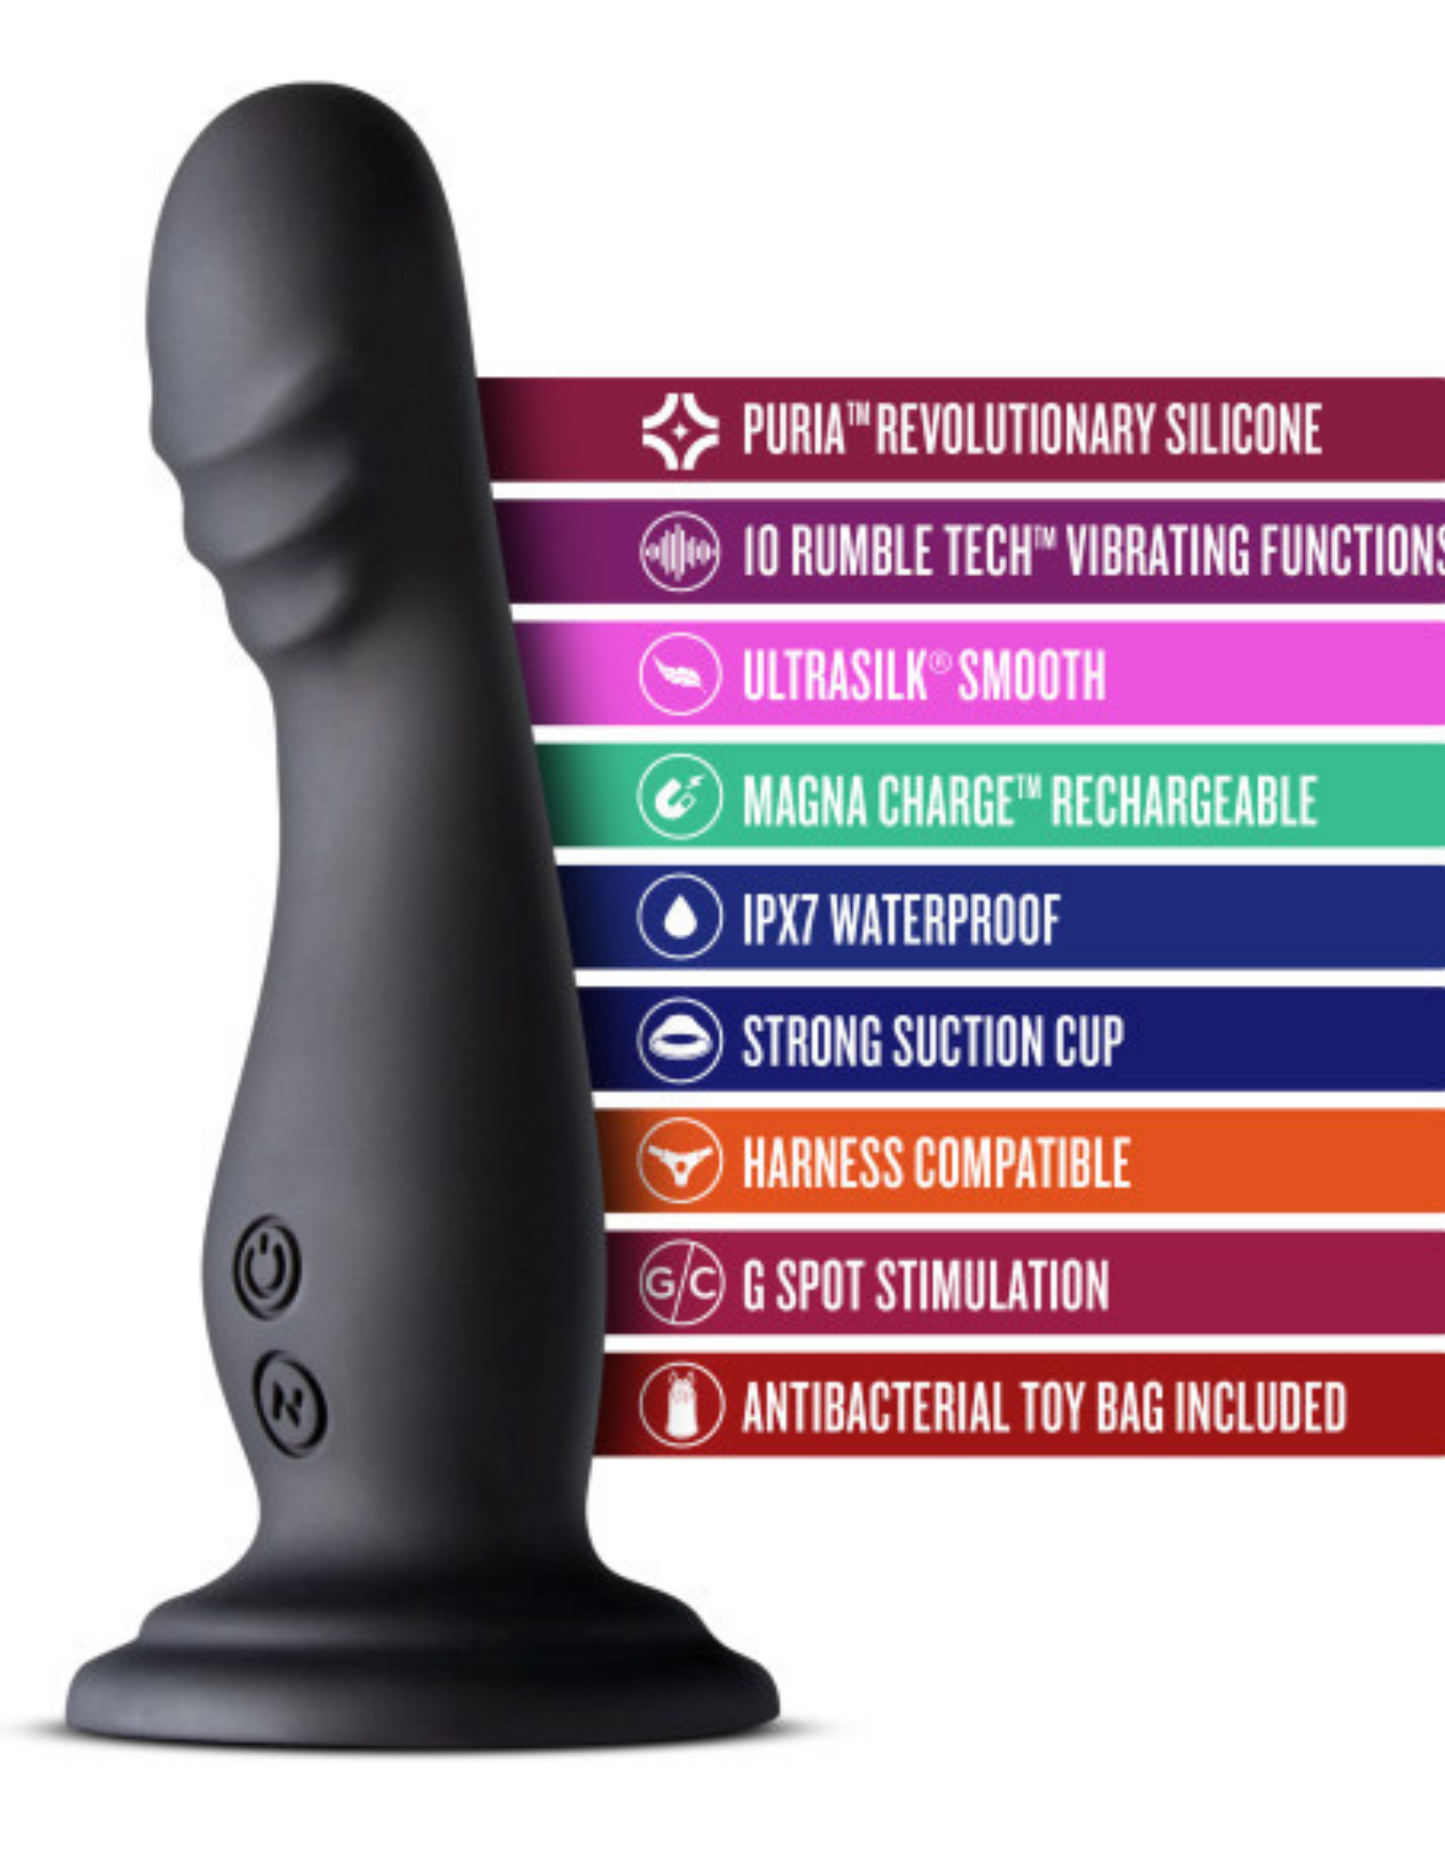 Image shows the Impressions Amsterdam Vibrator from Blush (black) and highlights its features as noted on the description page.